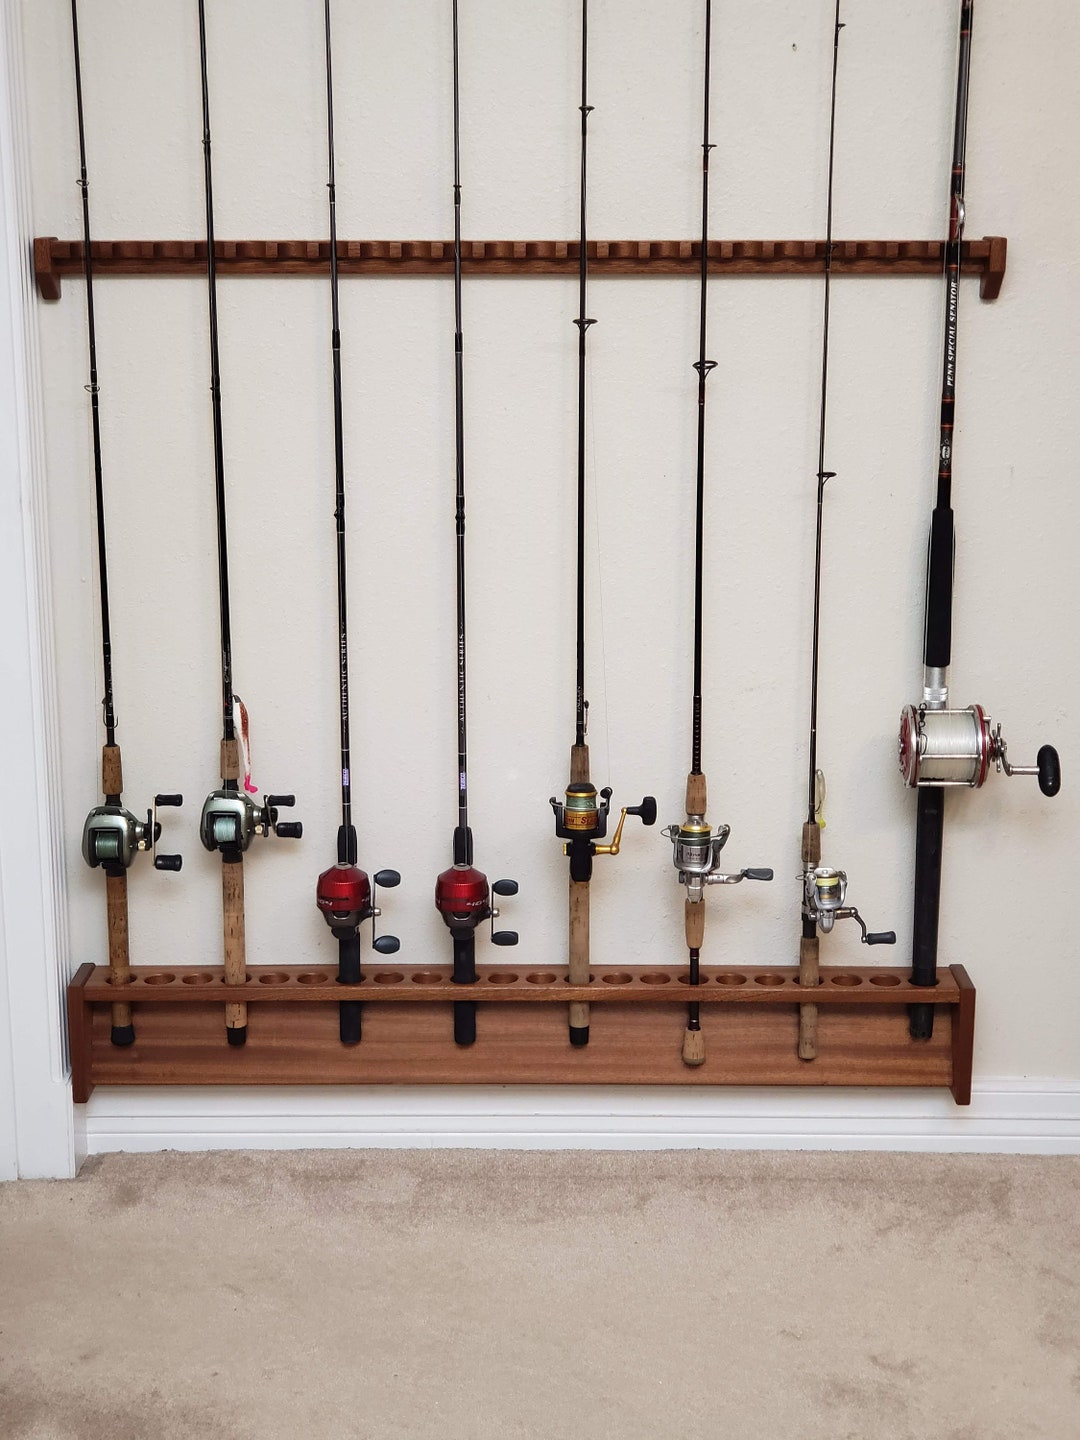 Solid Mahogany Rod Rack, 46 Inch Wall Mounted Built in Fishing Pole Holder,  Real Estate Closing Gift for Fisherman Outdoorsman Hunting Cabin -   Canada